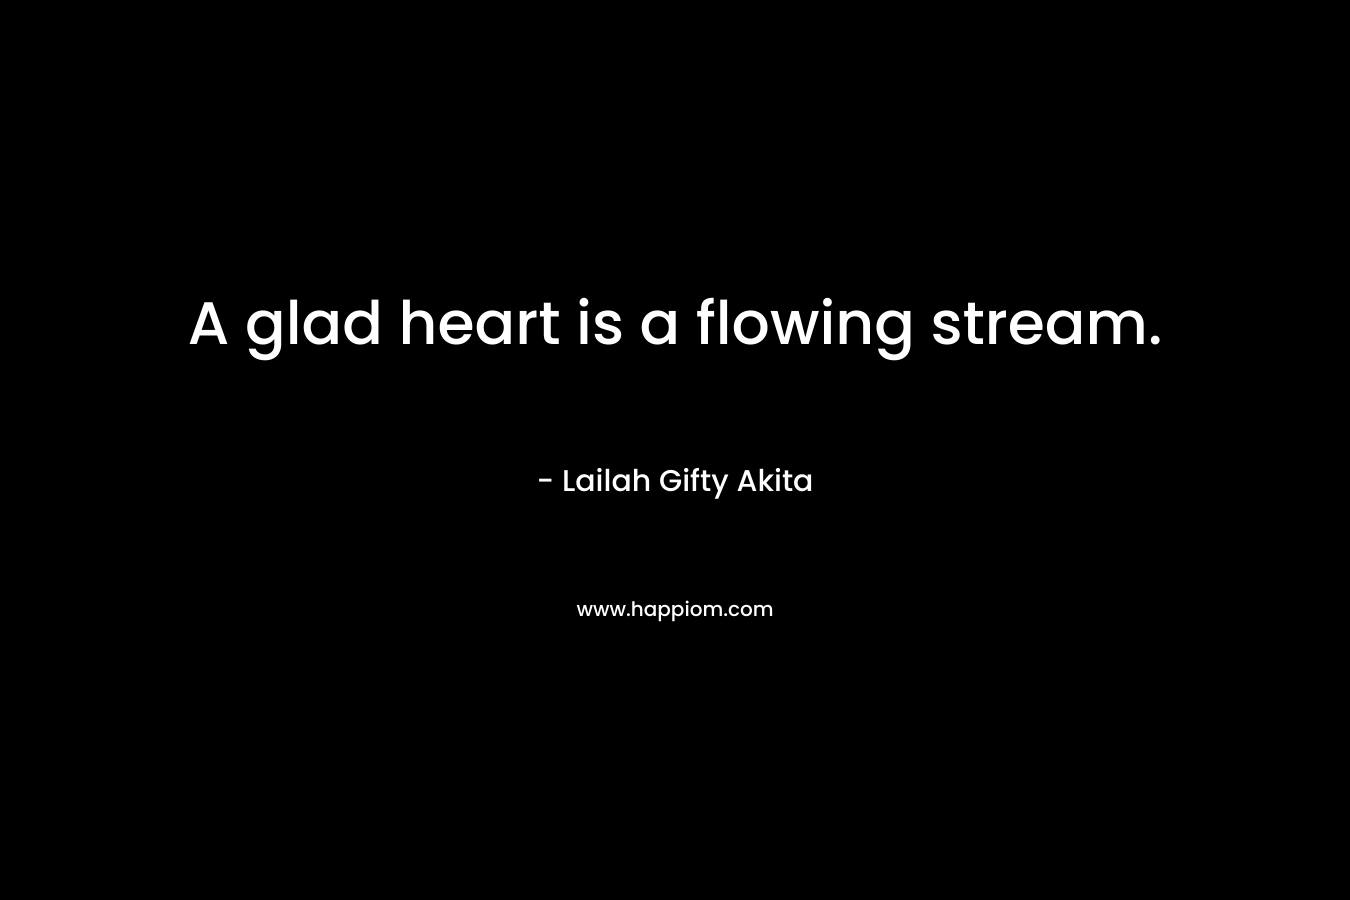 A glad heart is a flowing stream.